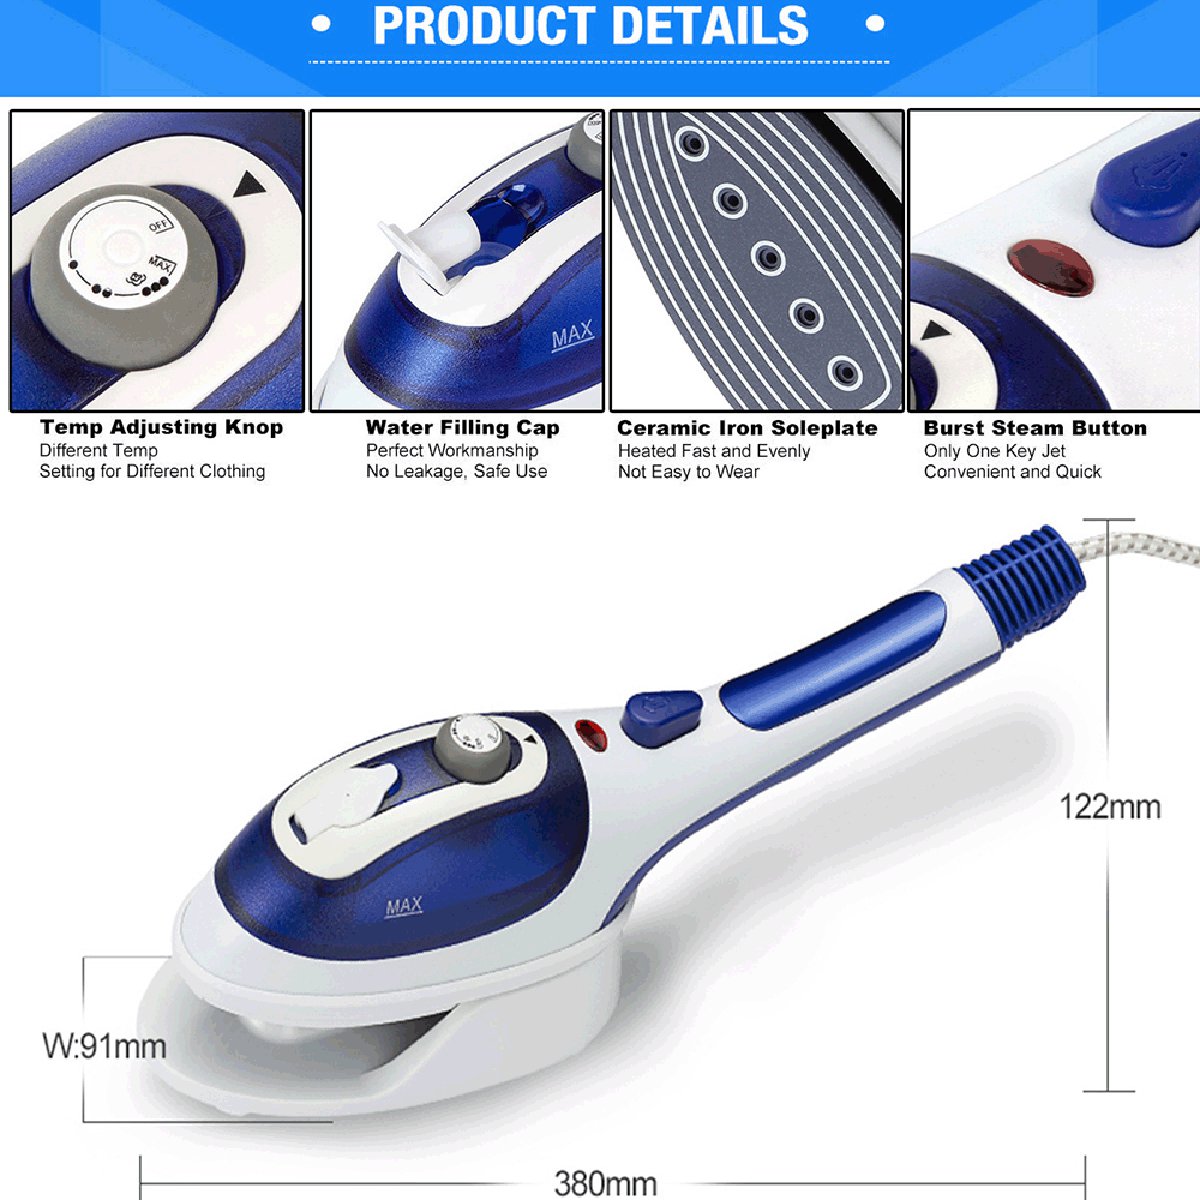 800W-Mini-Handheld-Garment-Steamer-Portable-Travel-Steam-Iron-Temp-3-Levels-Adjustable-For-Home-And--1762420-12